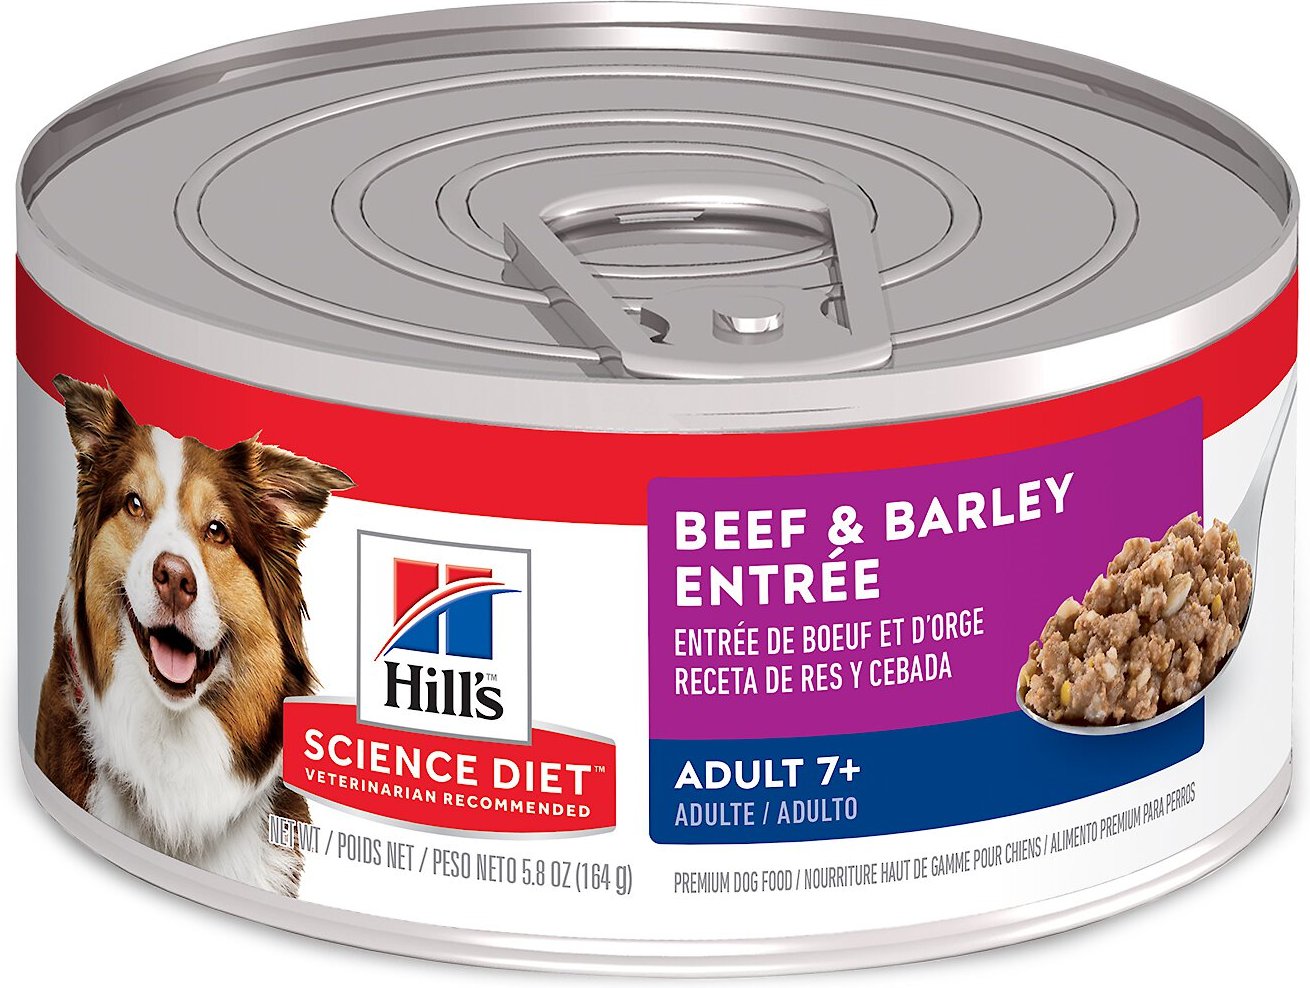 Hill's Science Diet Adult 7+ Beef & Barley Entree Canned Dog Food, 5.8